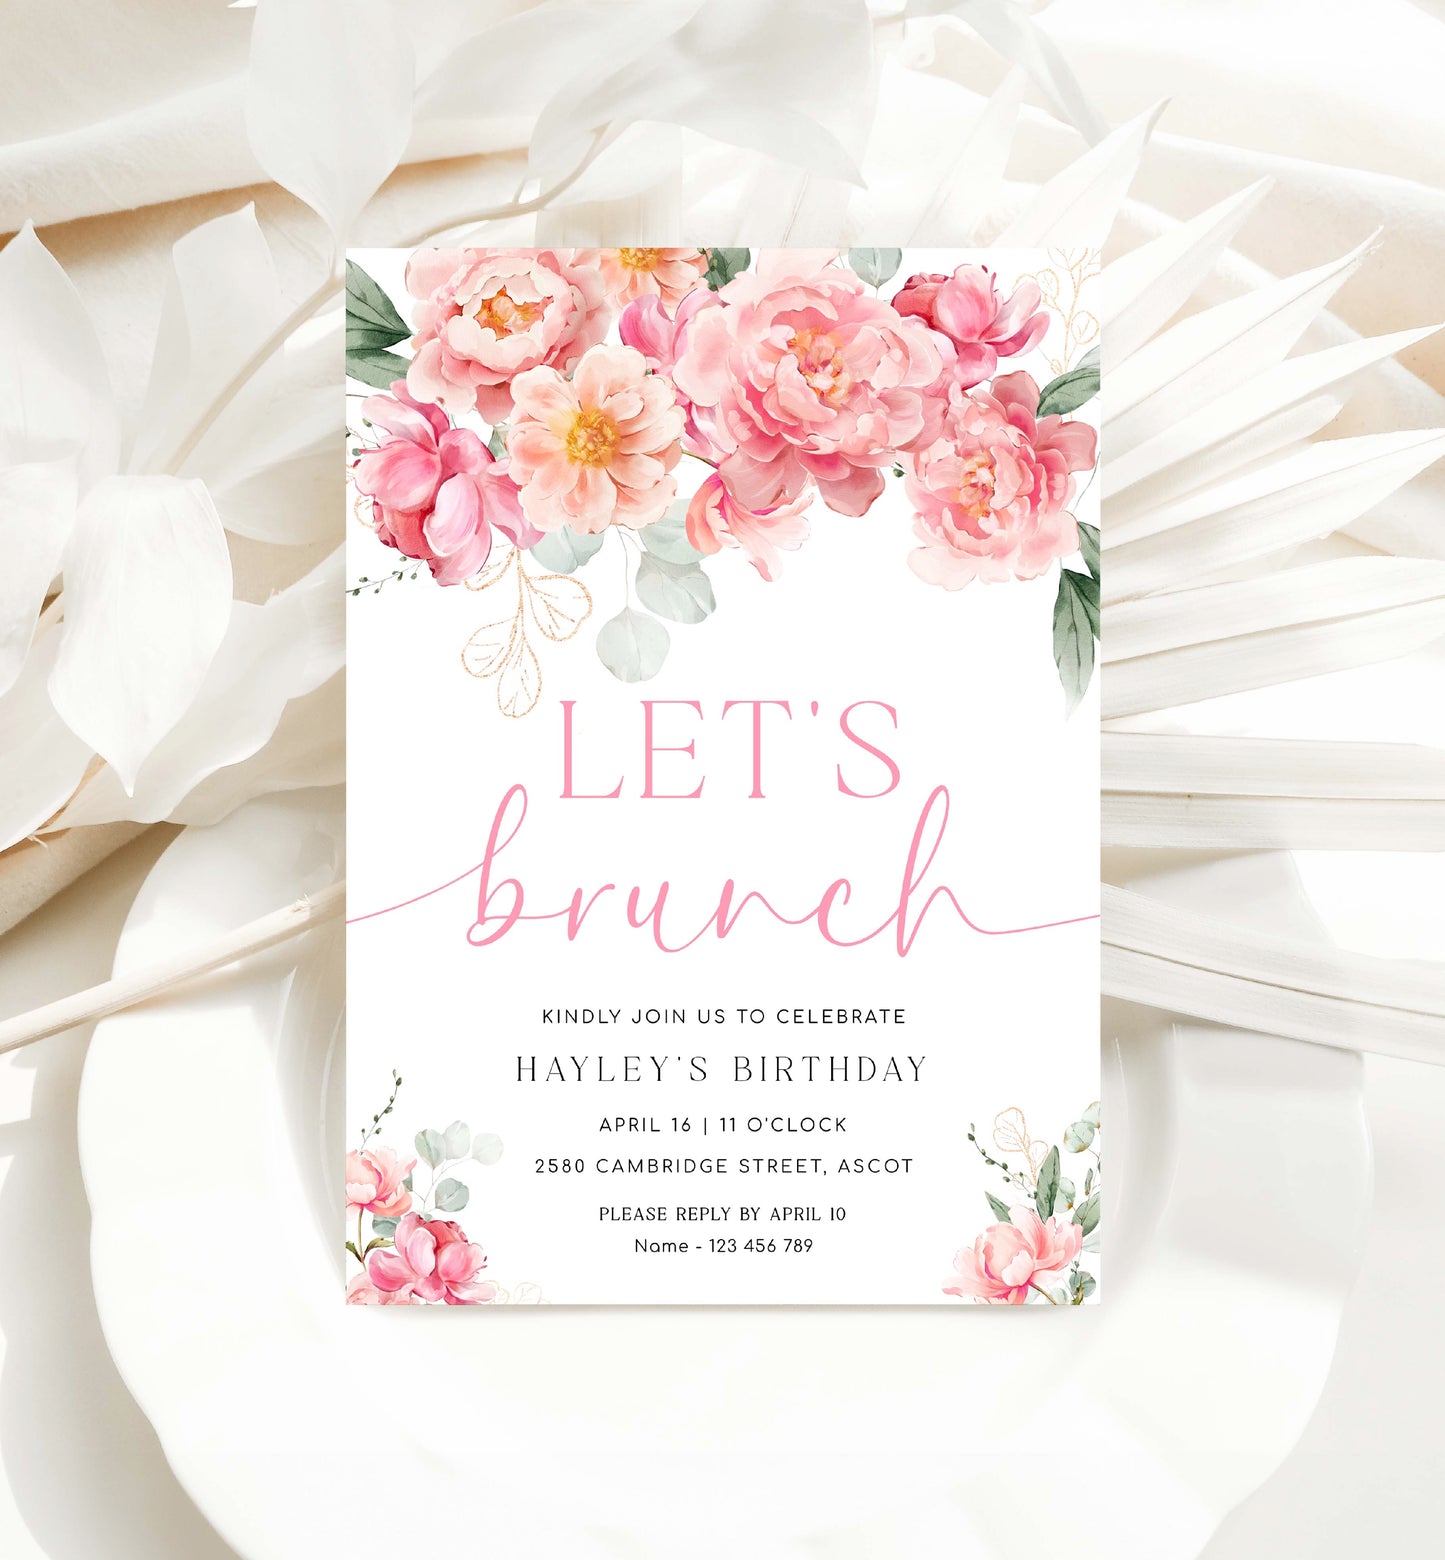 Let's Brunch Invite, Pink Peony Floral Birthday Brunch Party Invite, Printable Girls Birthday Party Invite, Ladies Lunch Invite, Piper